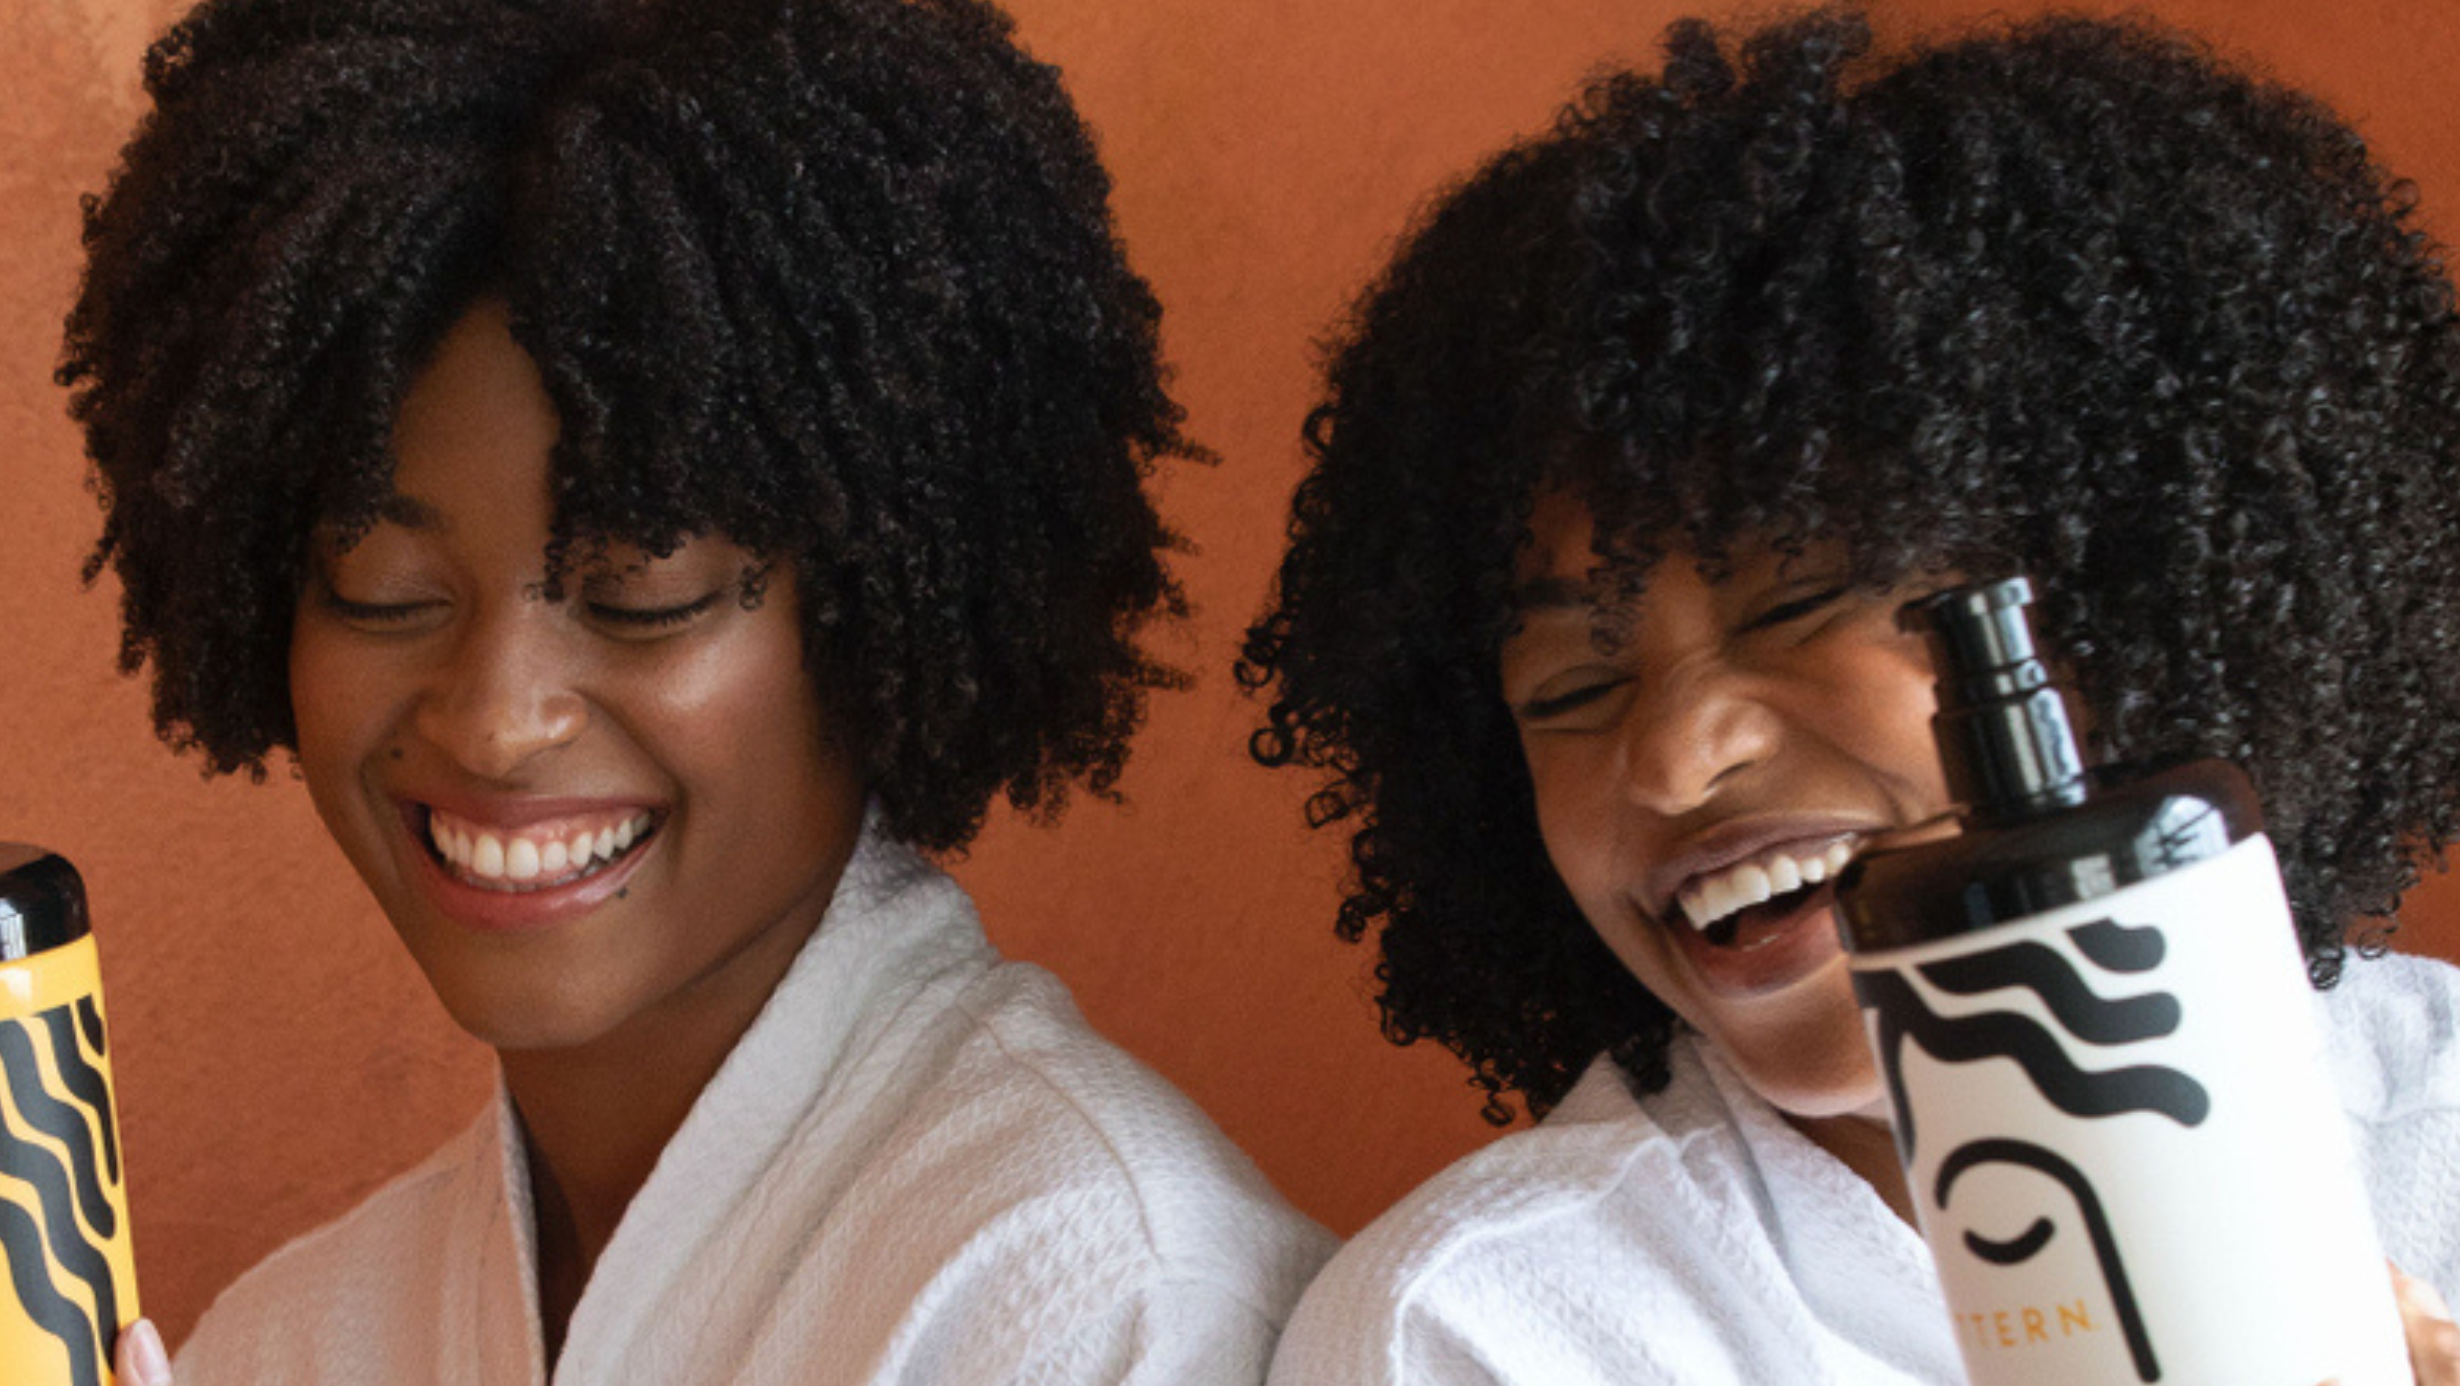 11 Conditioners And Shampoos Made With Natural, 4C Hair In Mind